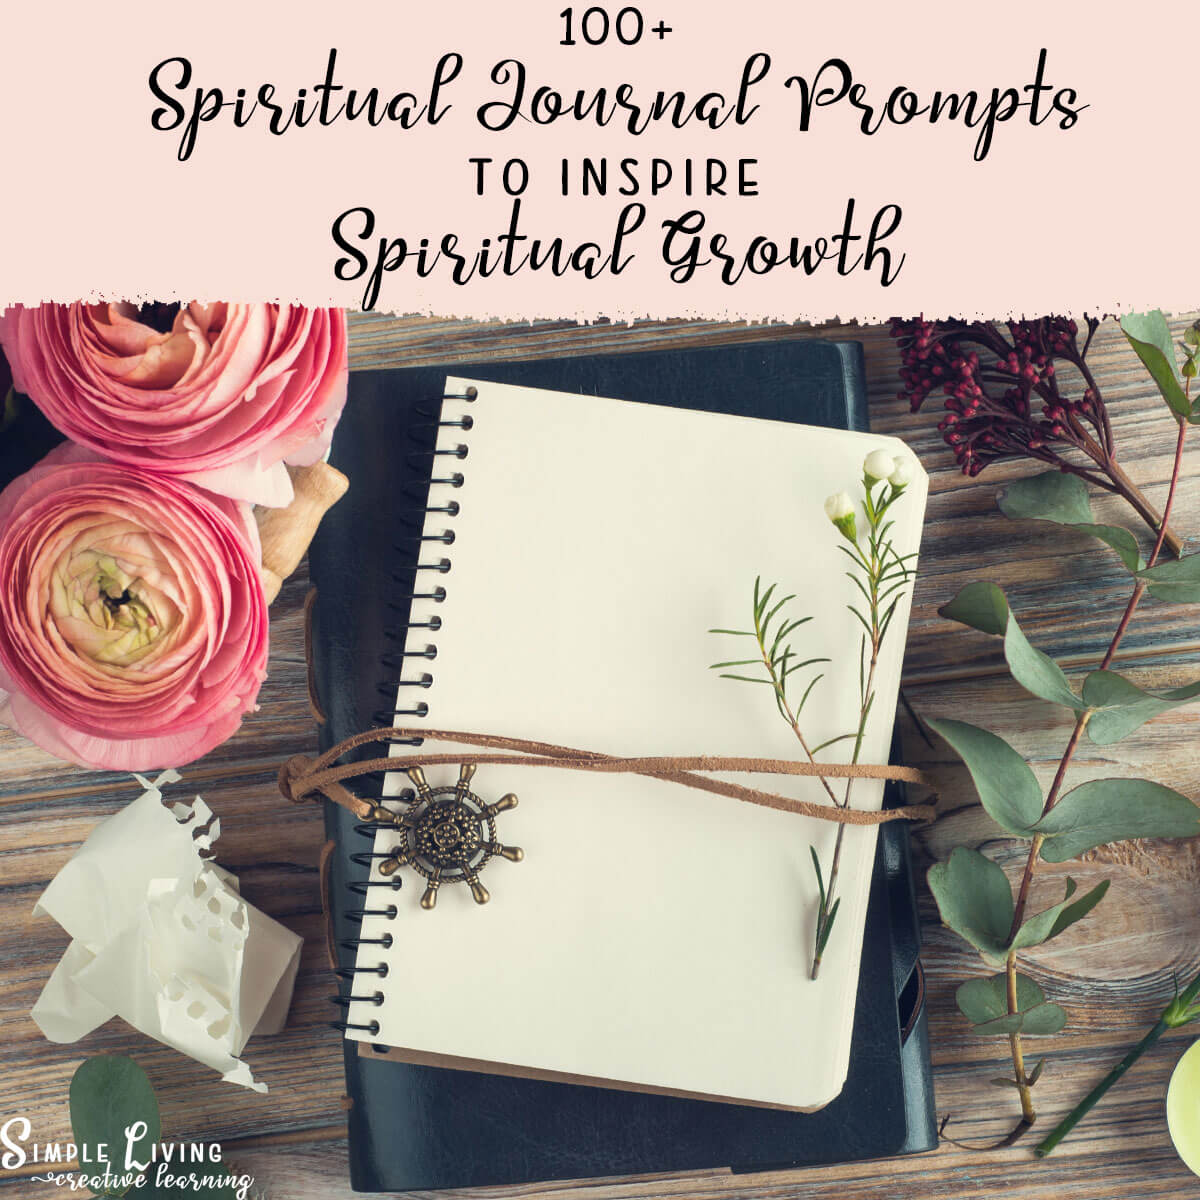 100+ Spiritual Journal Prompts to Inspire Spiritual Growth - journal picture